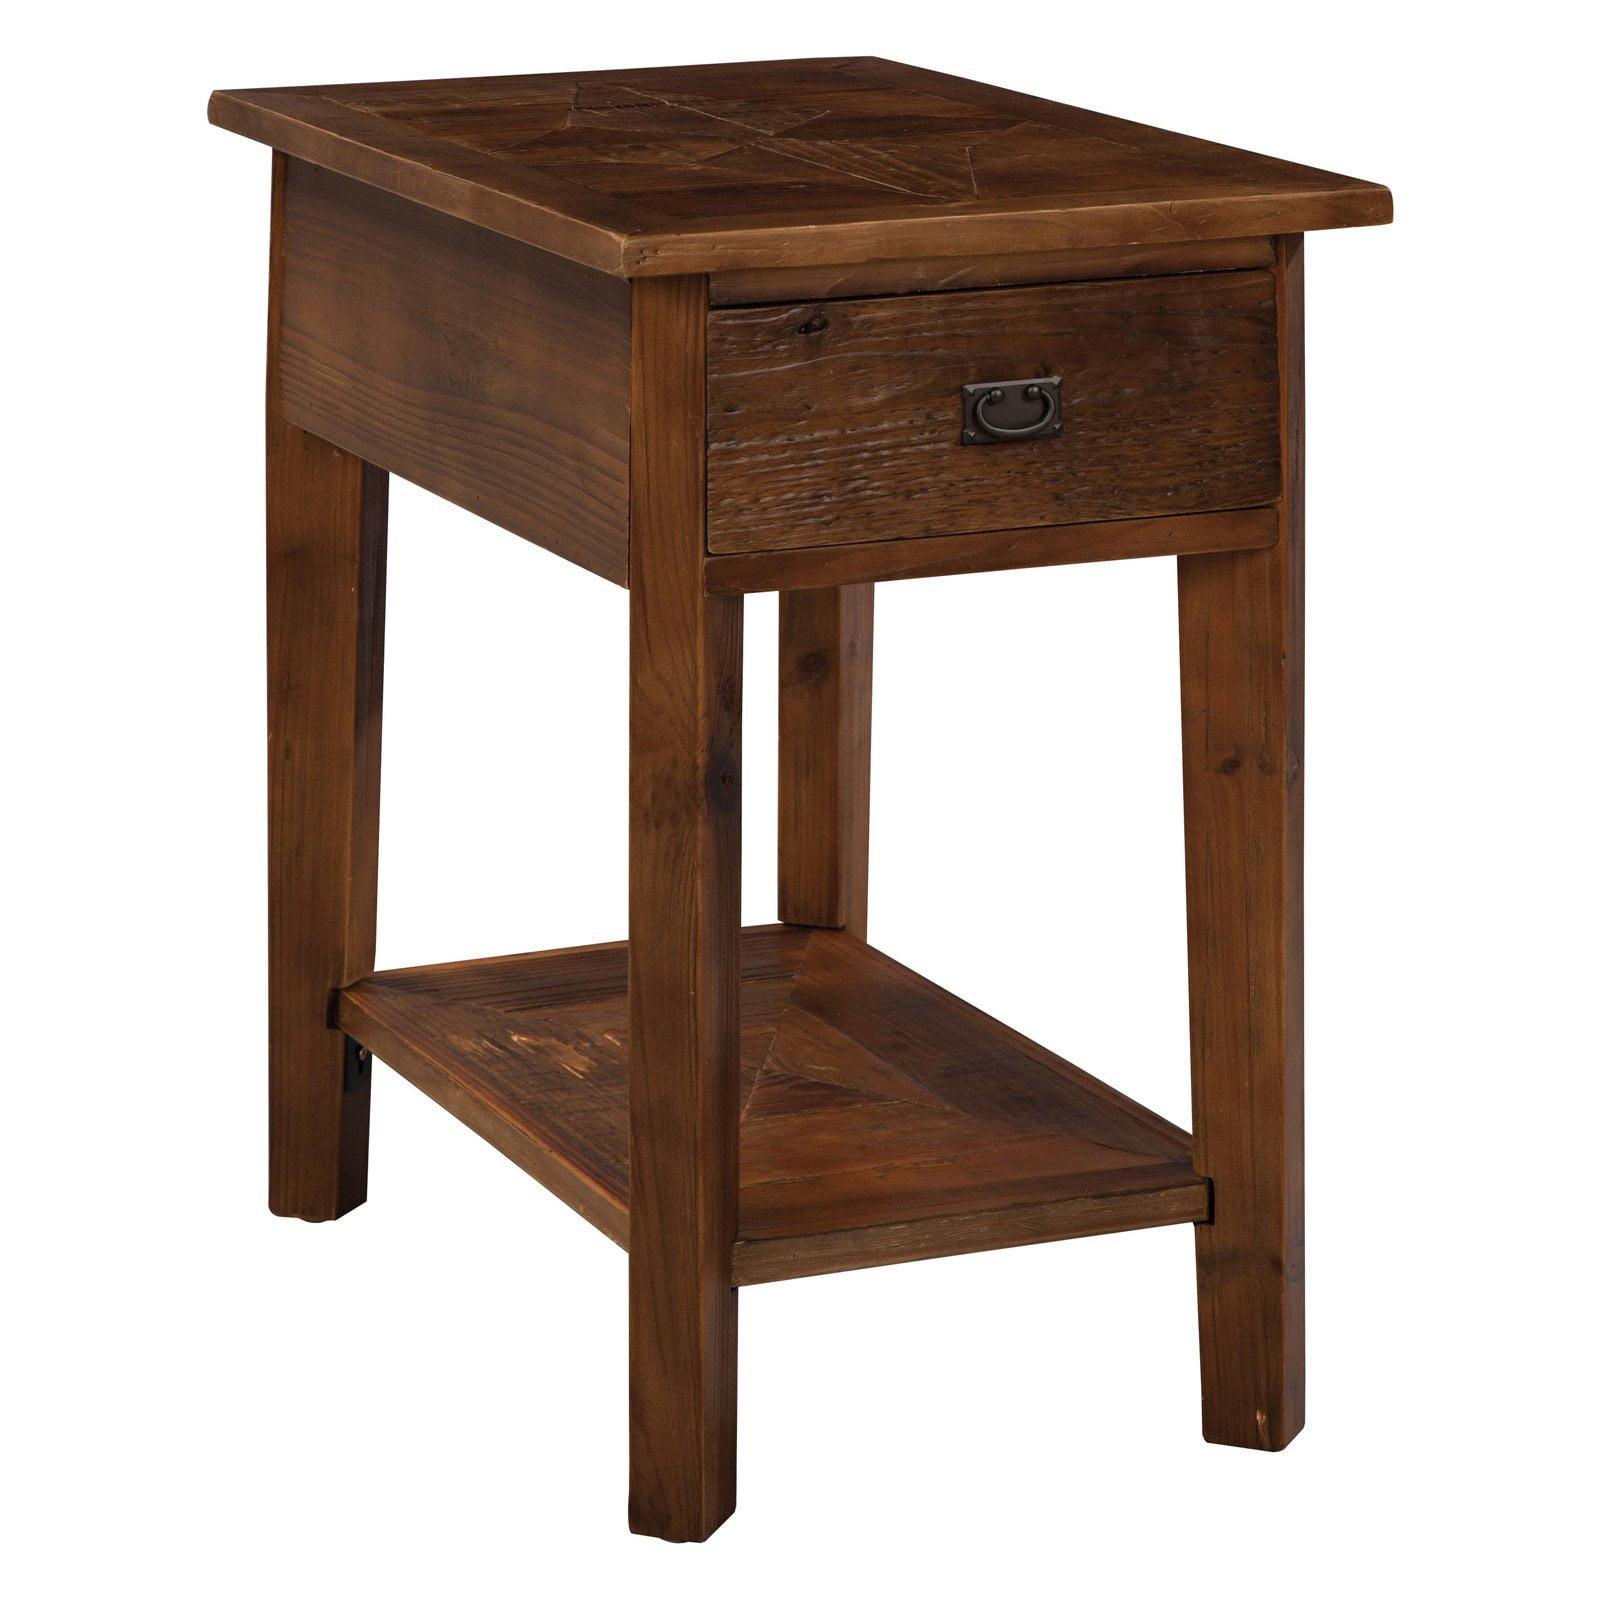 Eco-Friendly Reclaimed Wood Chairside Table with Storage - Natural Finish